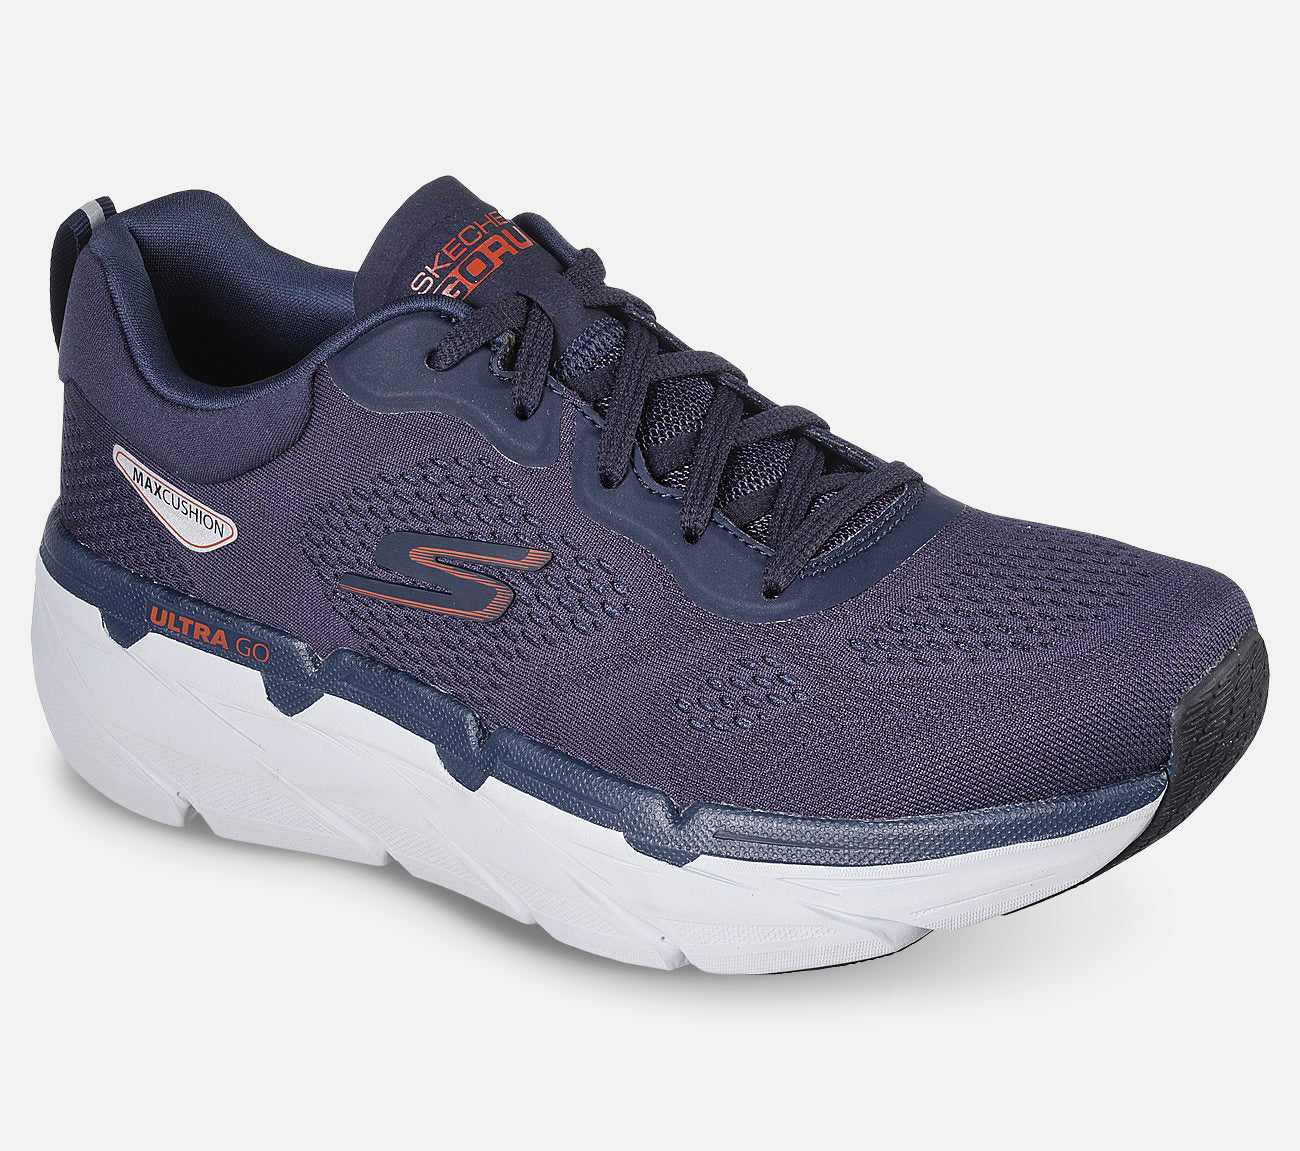 Skechers Max cushioning premier - Perspective